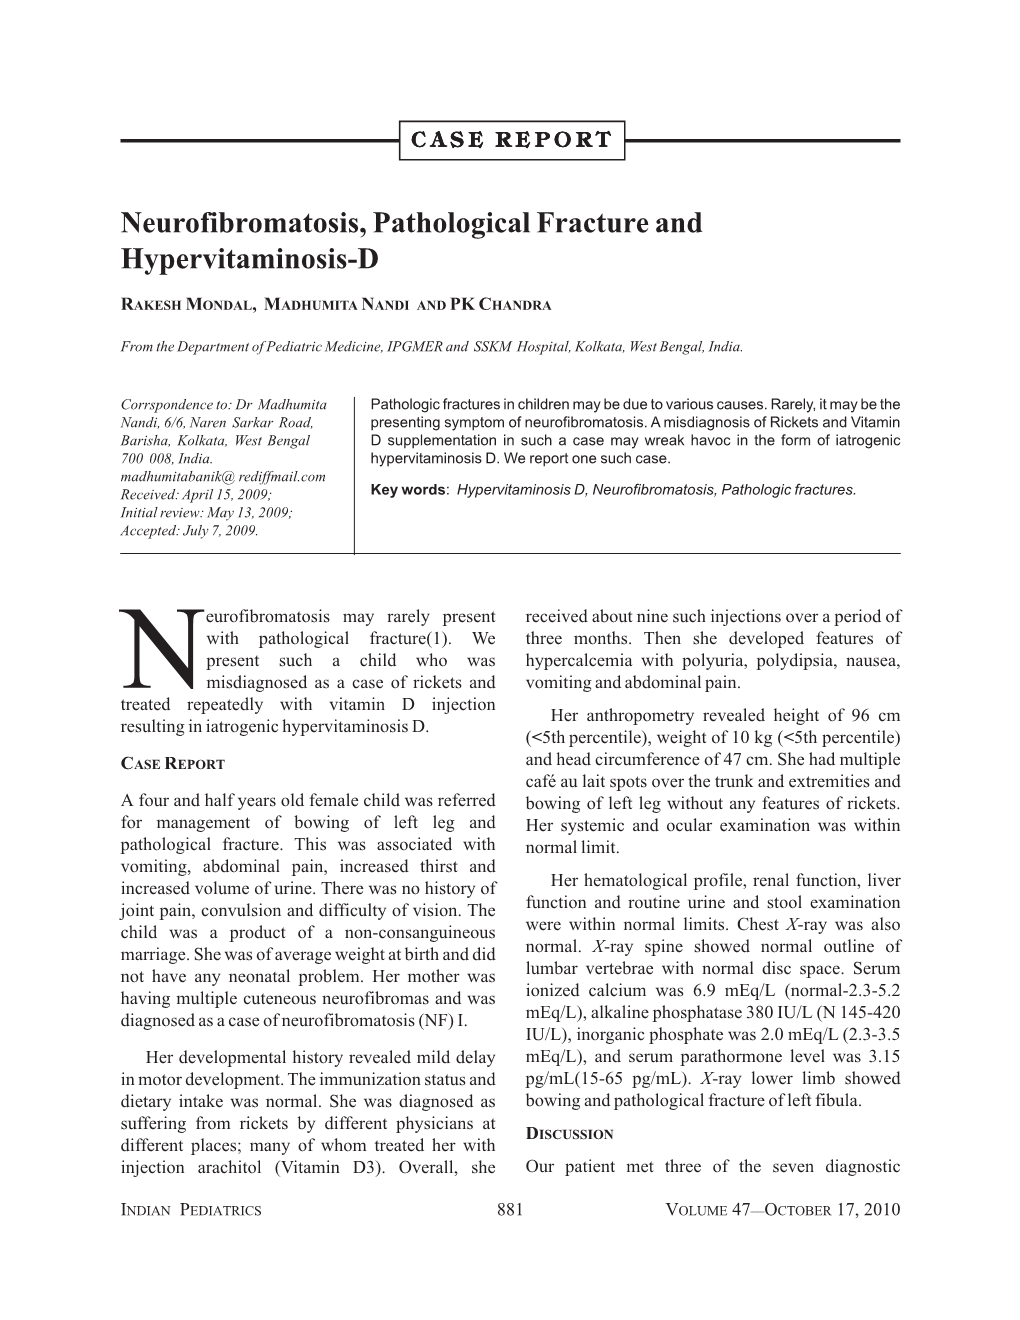 Neurofibromatosis, Pathological Fracture and Hypervitaminosis-D